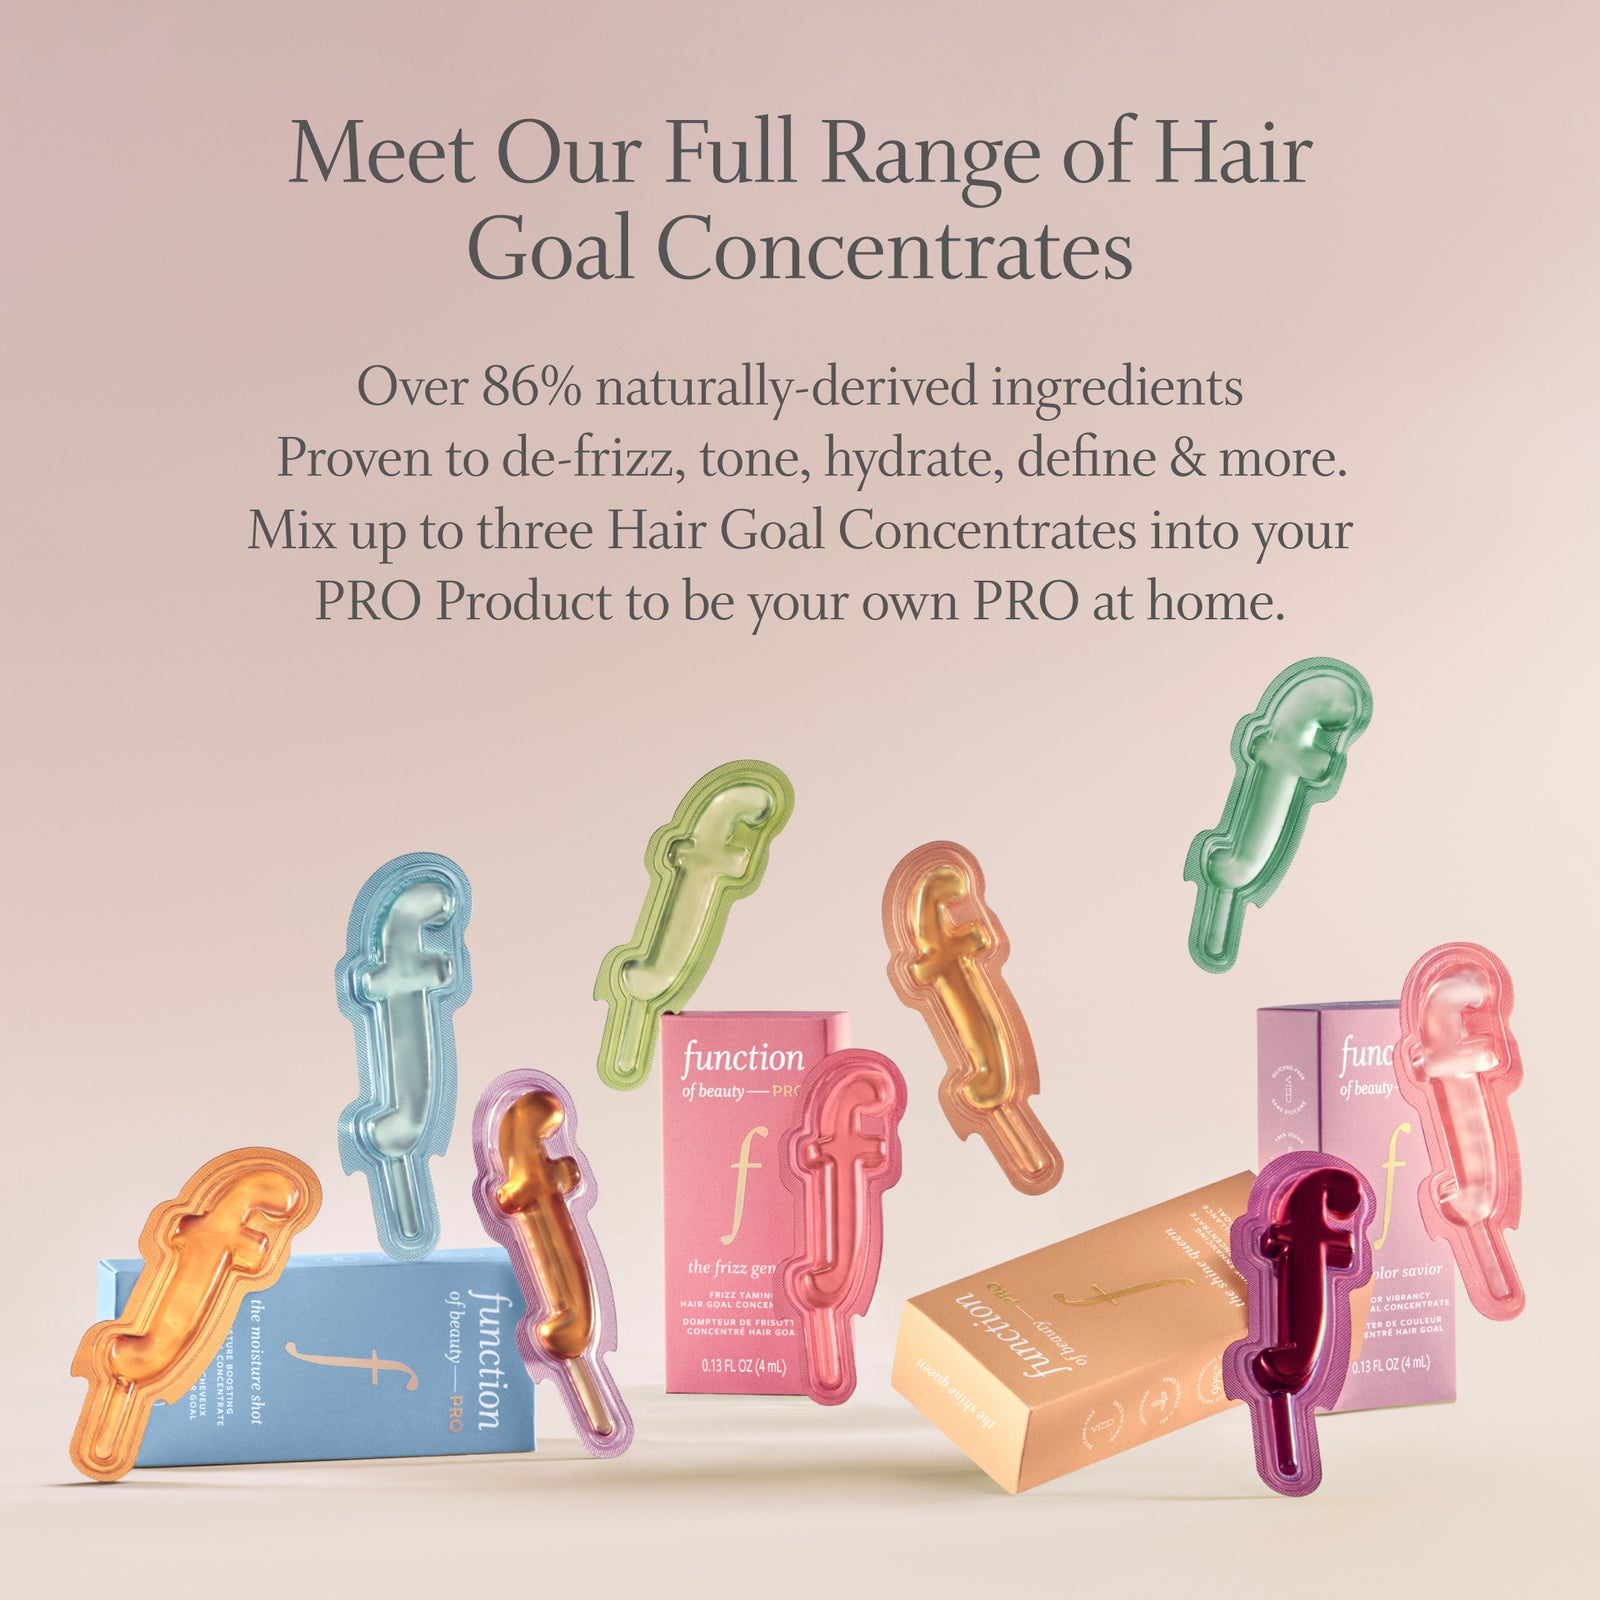 Volumizing Hair Goal Concentrate